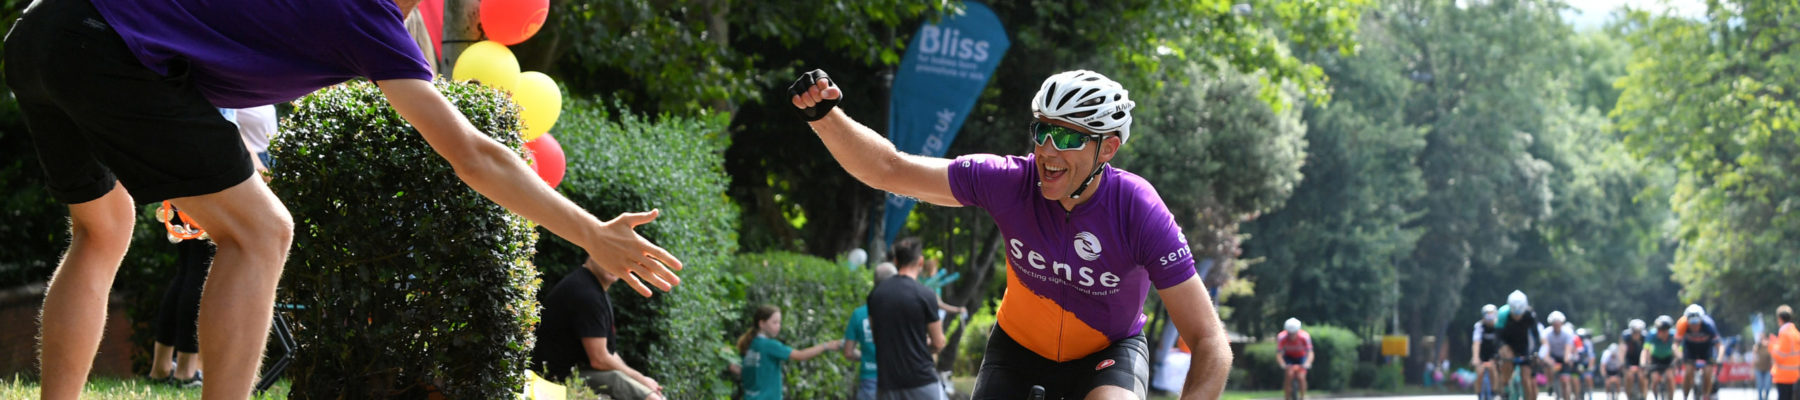 A male cyclist in a Sense jersey high fiving spectators